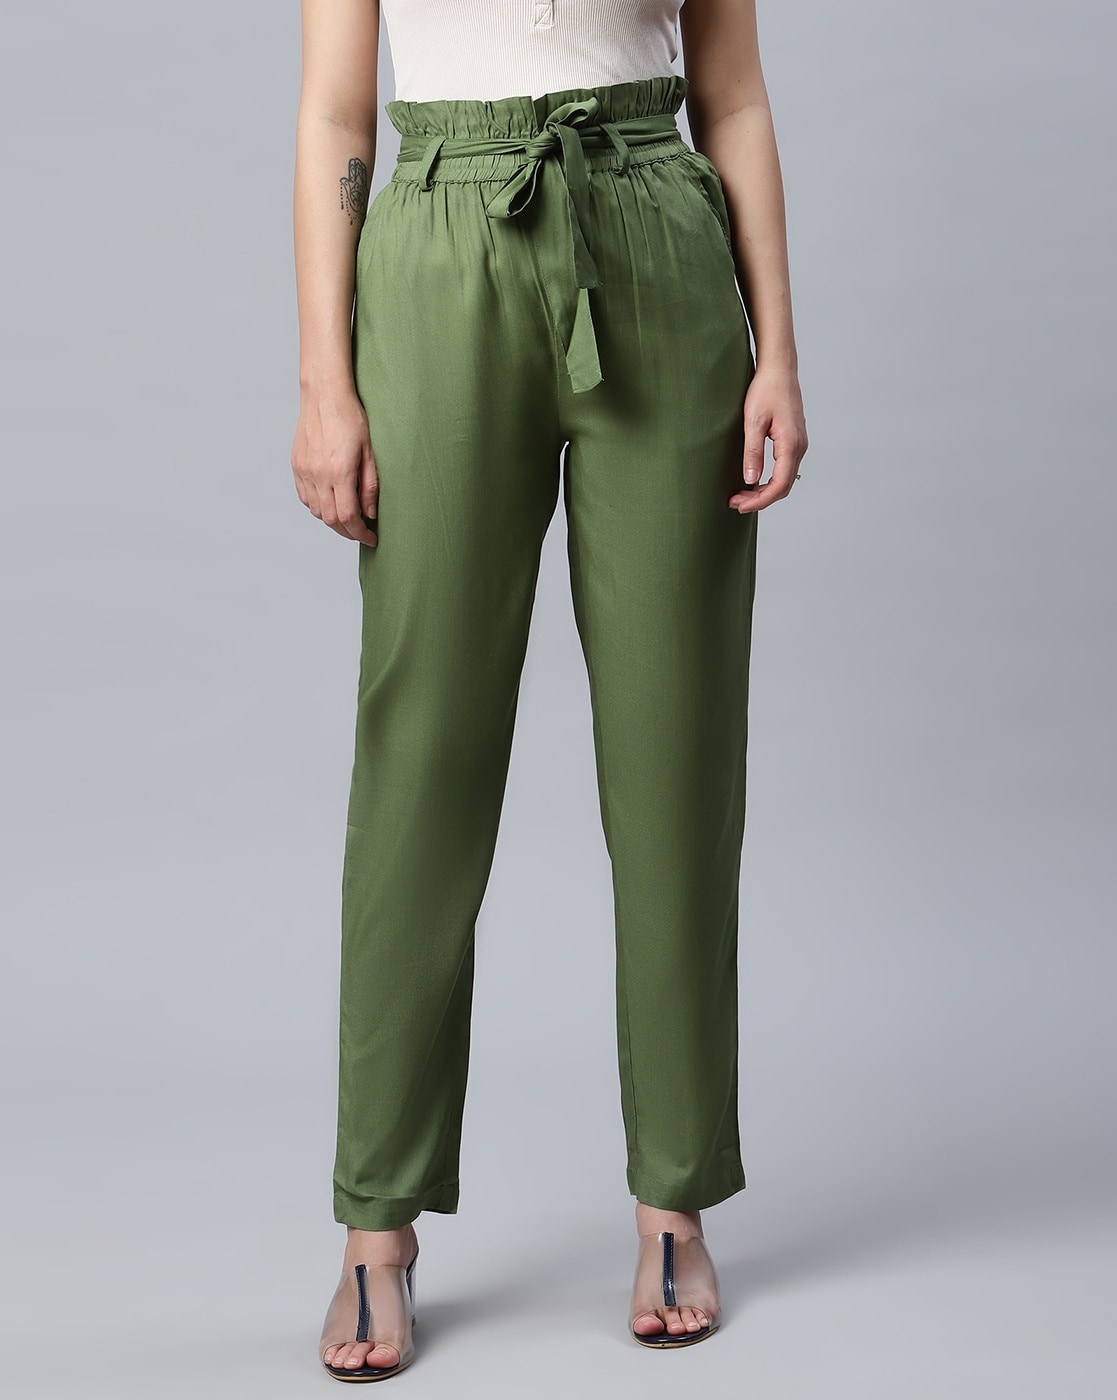 Paper Bag Trousers  Buy Paper Bag Trousers online in India